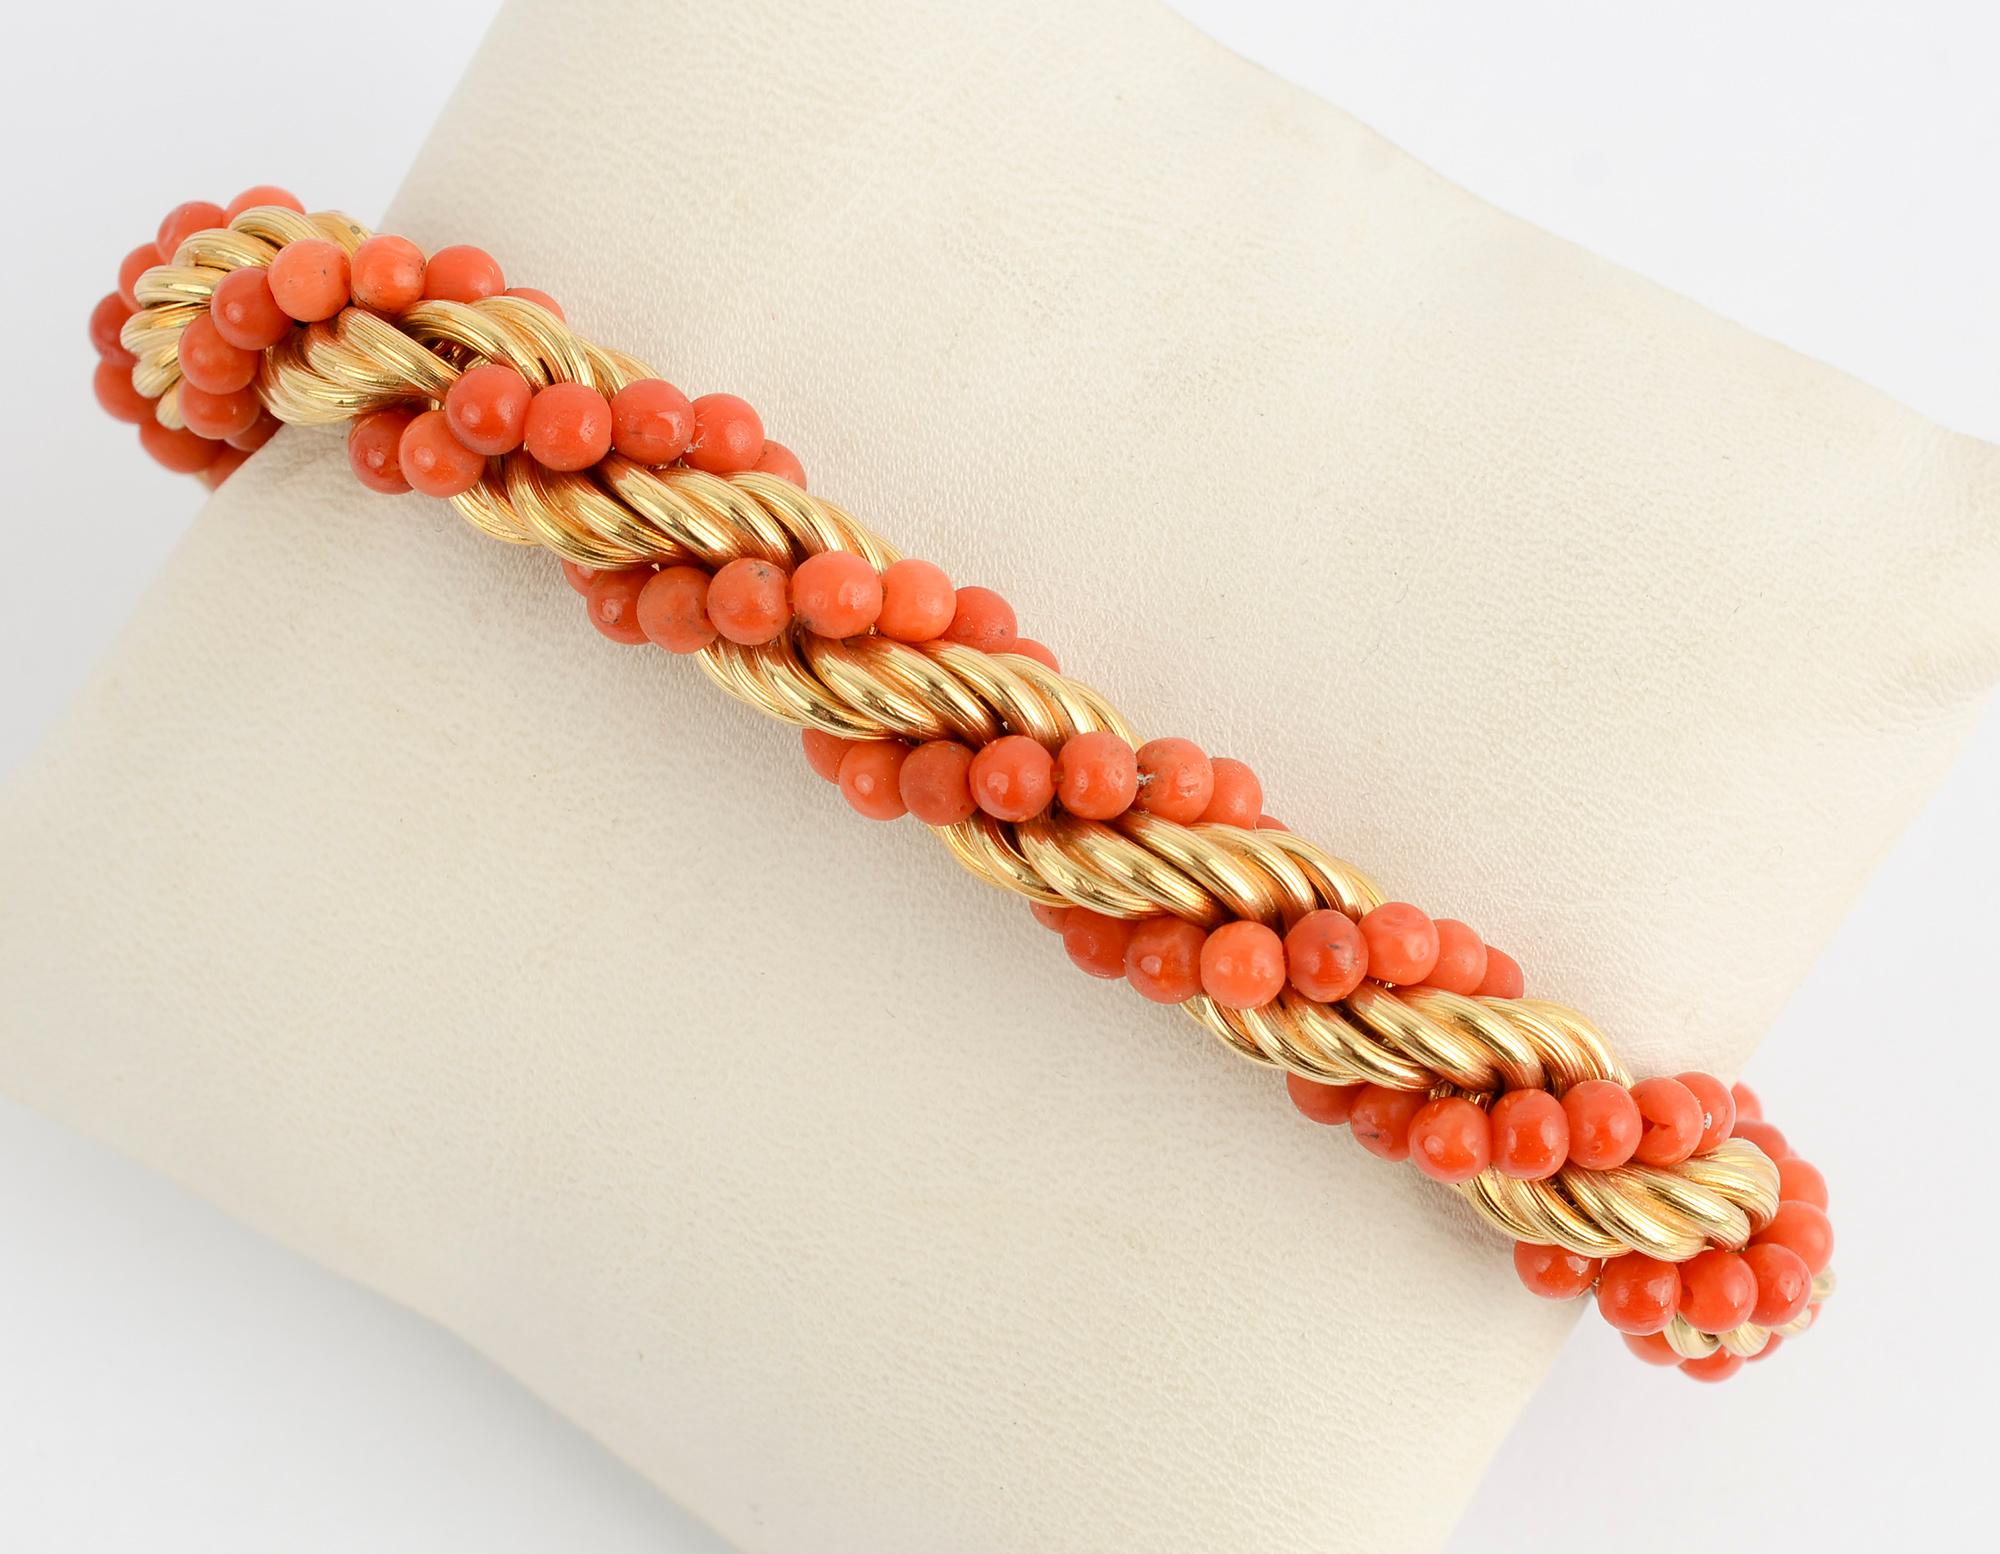 Classic rope twist bracelet by Van Cleef and Arpels. Bands of gold are combined with beautifully colored coral beads. Length is 8 3/16